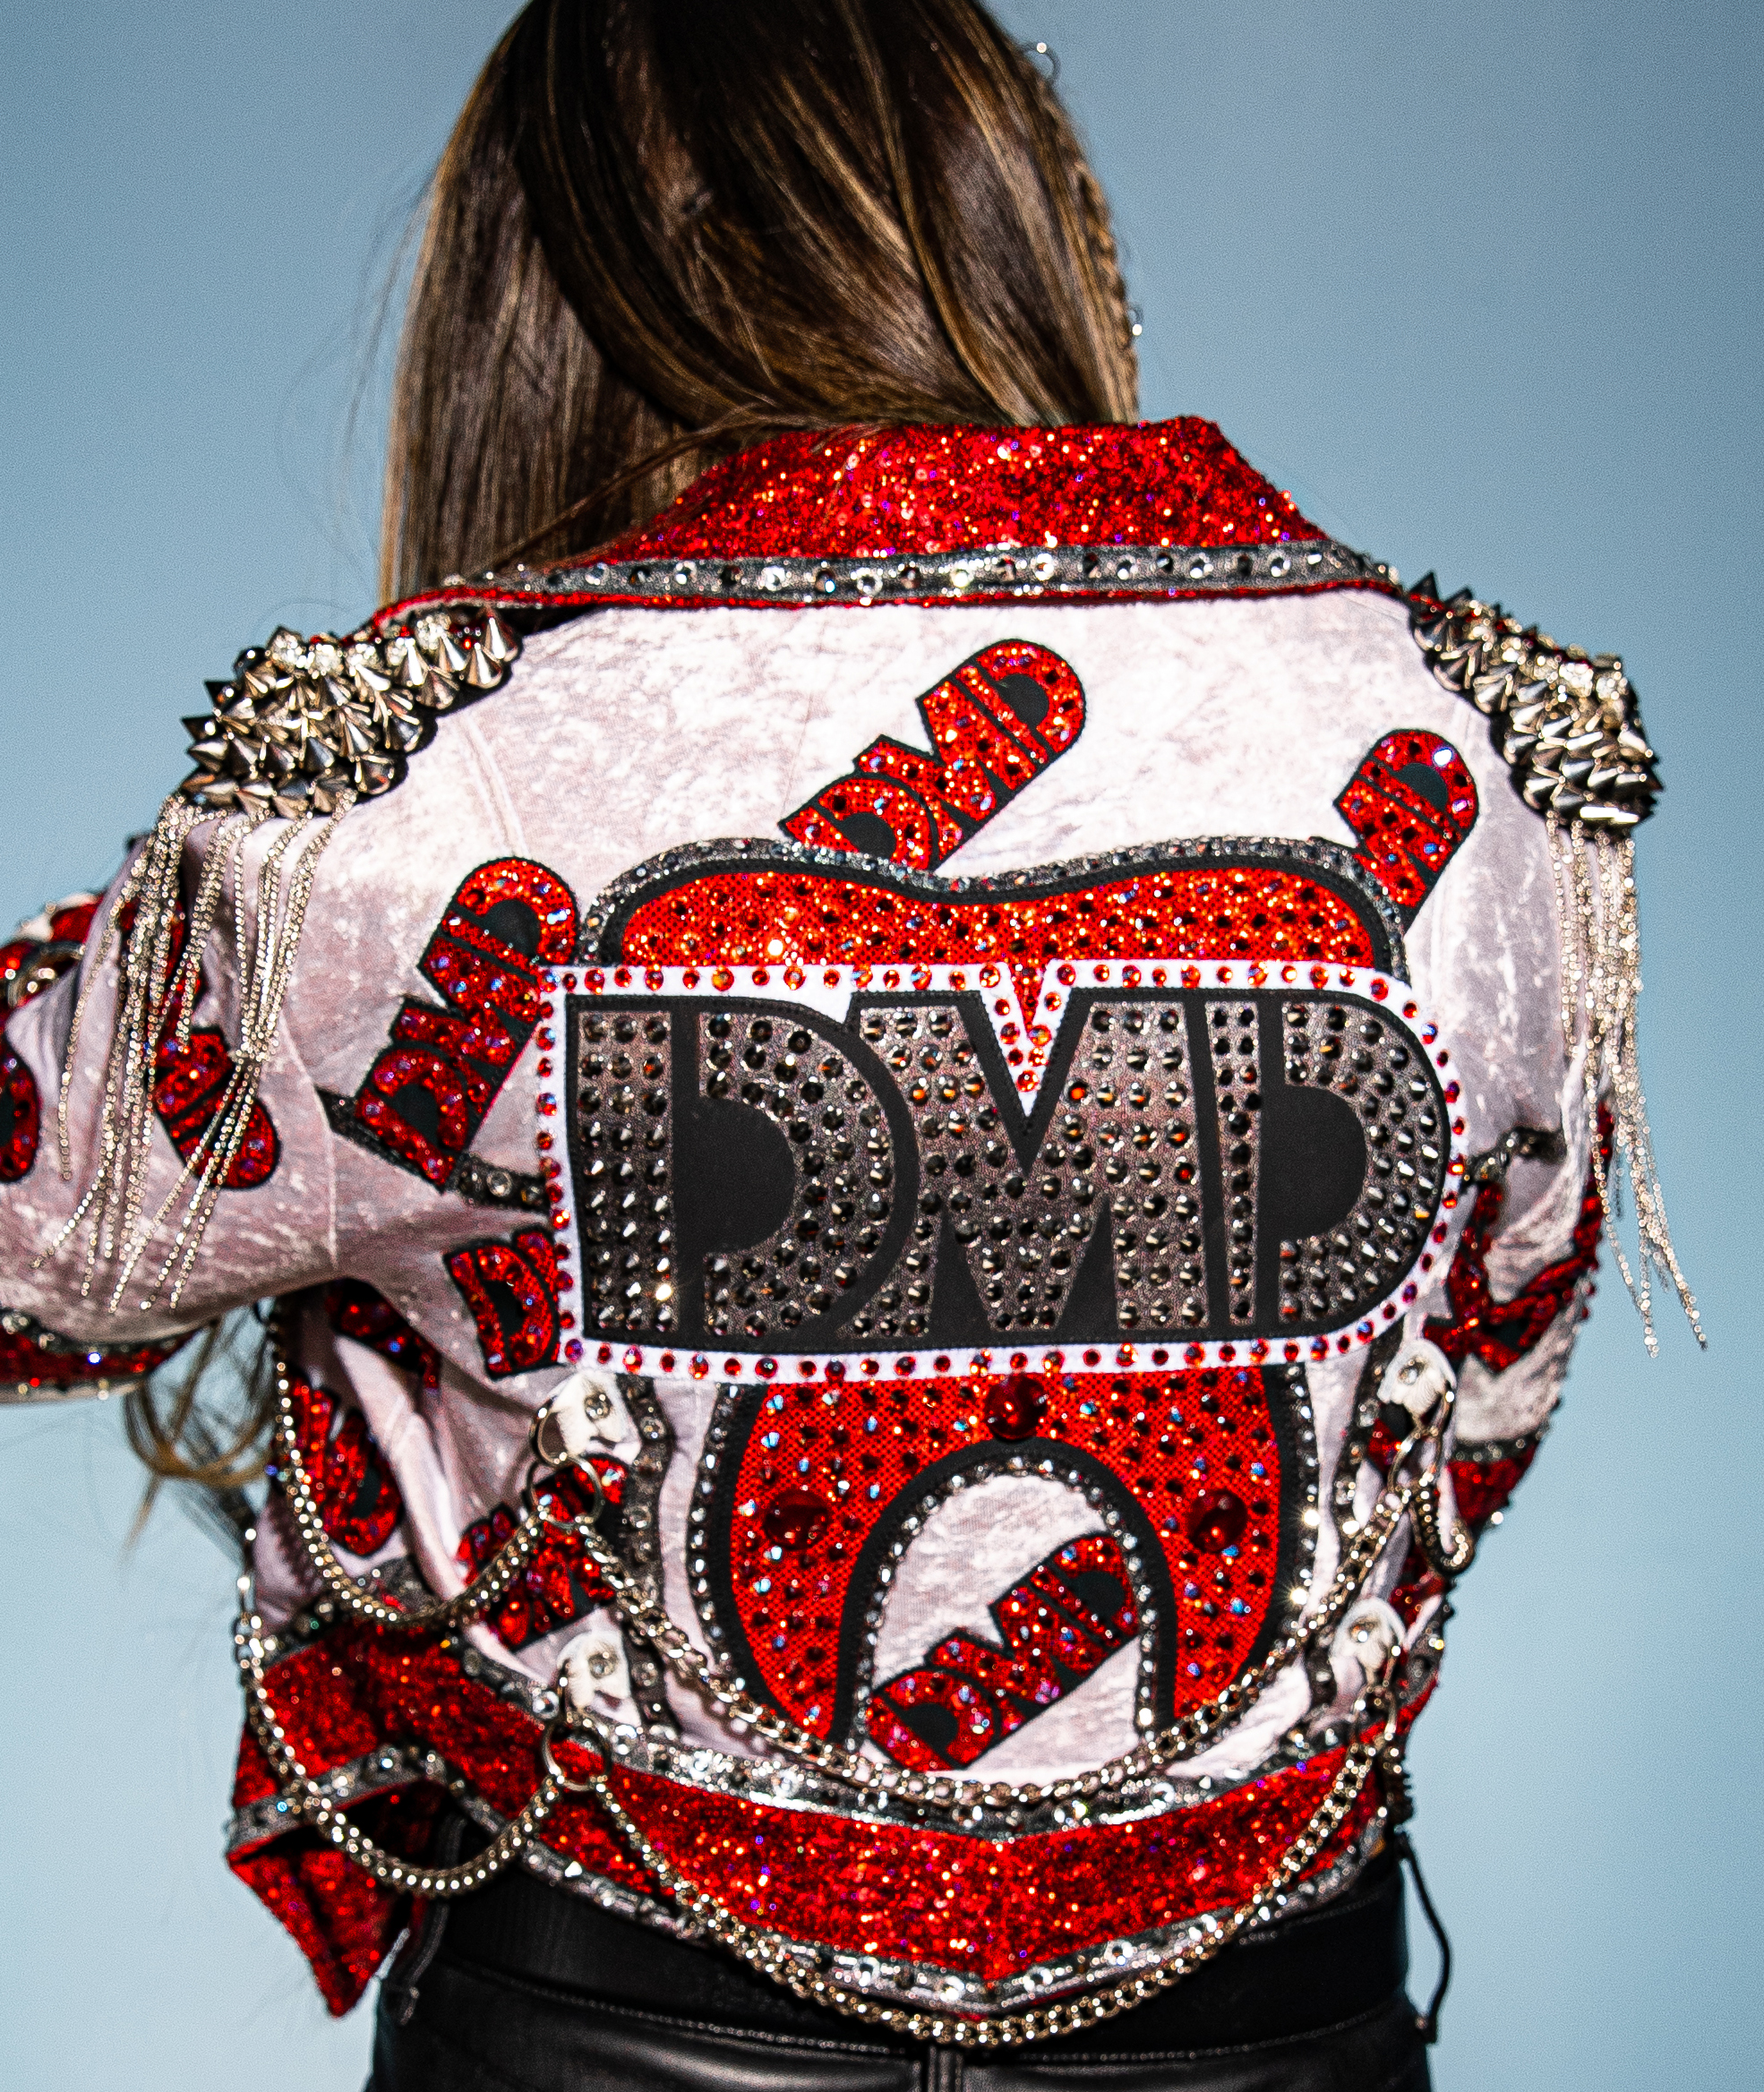 Britt Baker with her back to the camera wearing a rhinestone encrusted jacket with DMD on the back by Cardoni